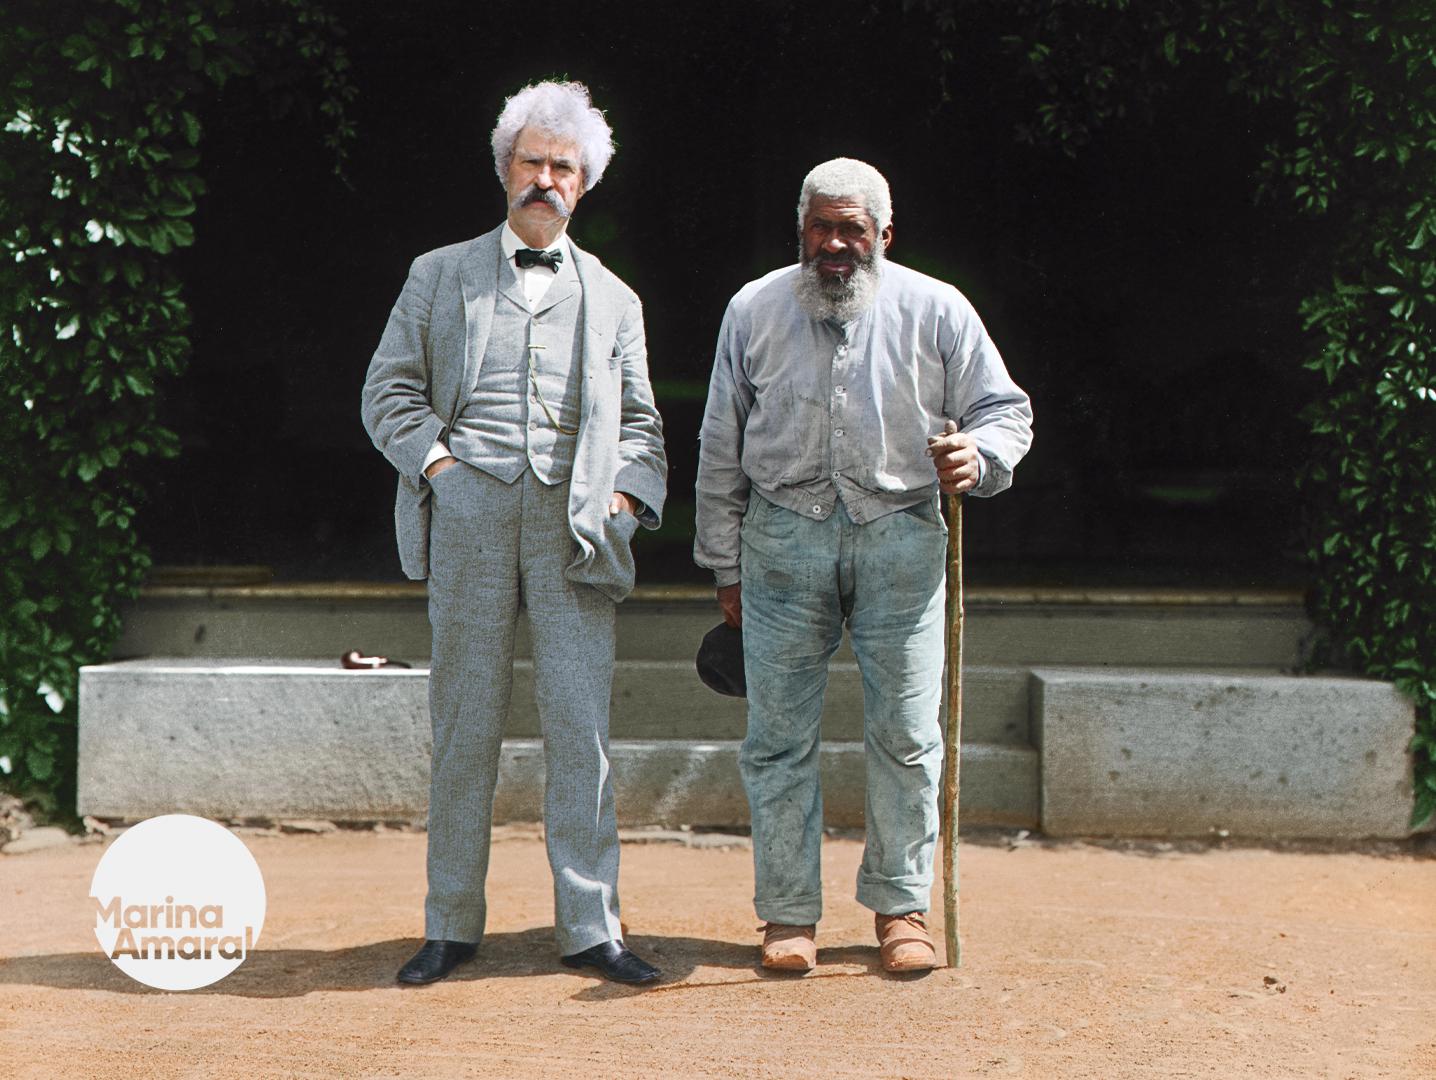 Mark Twain and his long-time friend John T. Lewis, the inspiration for the character “Jim” in “Huckleberry Finn”, New York, 1903.